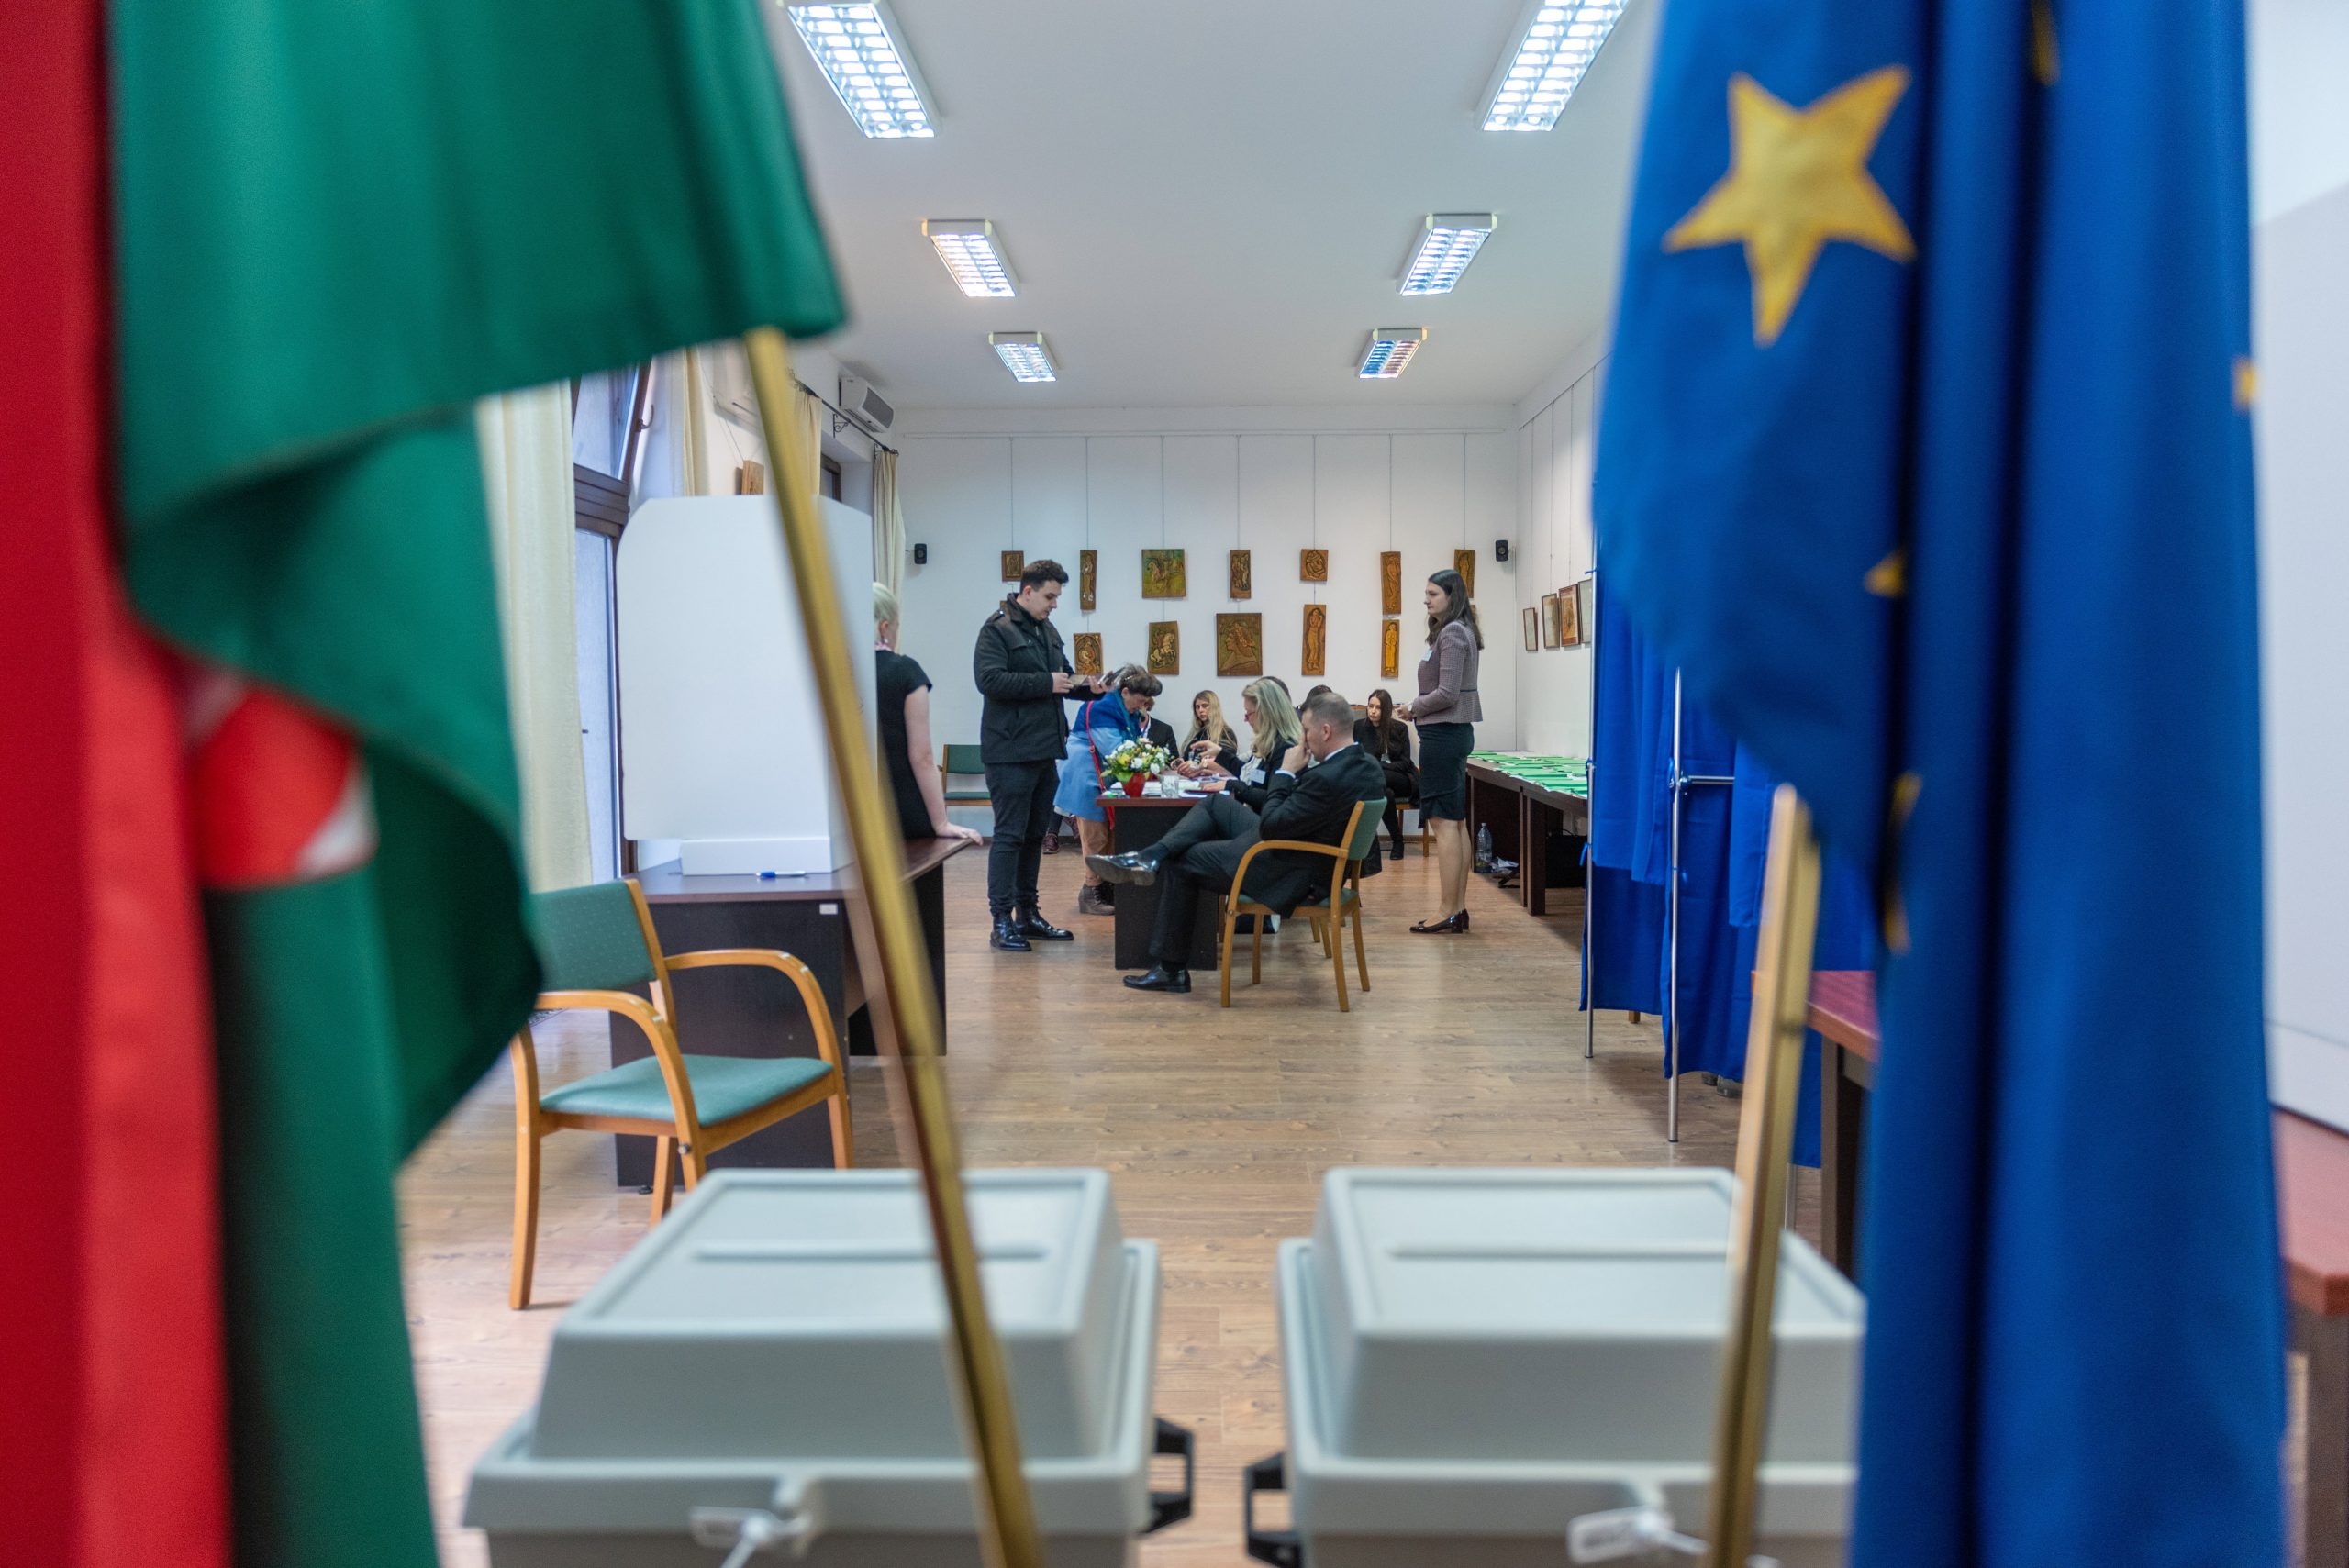 A Snowball's Chance in April: Hungary Votes amid Winter-like Weather, while Pollsters Predict Fourth Fidesz Victory